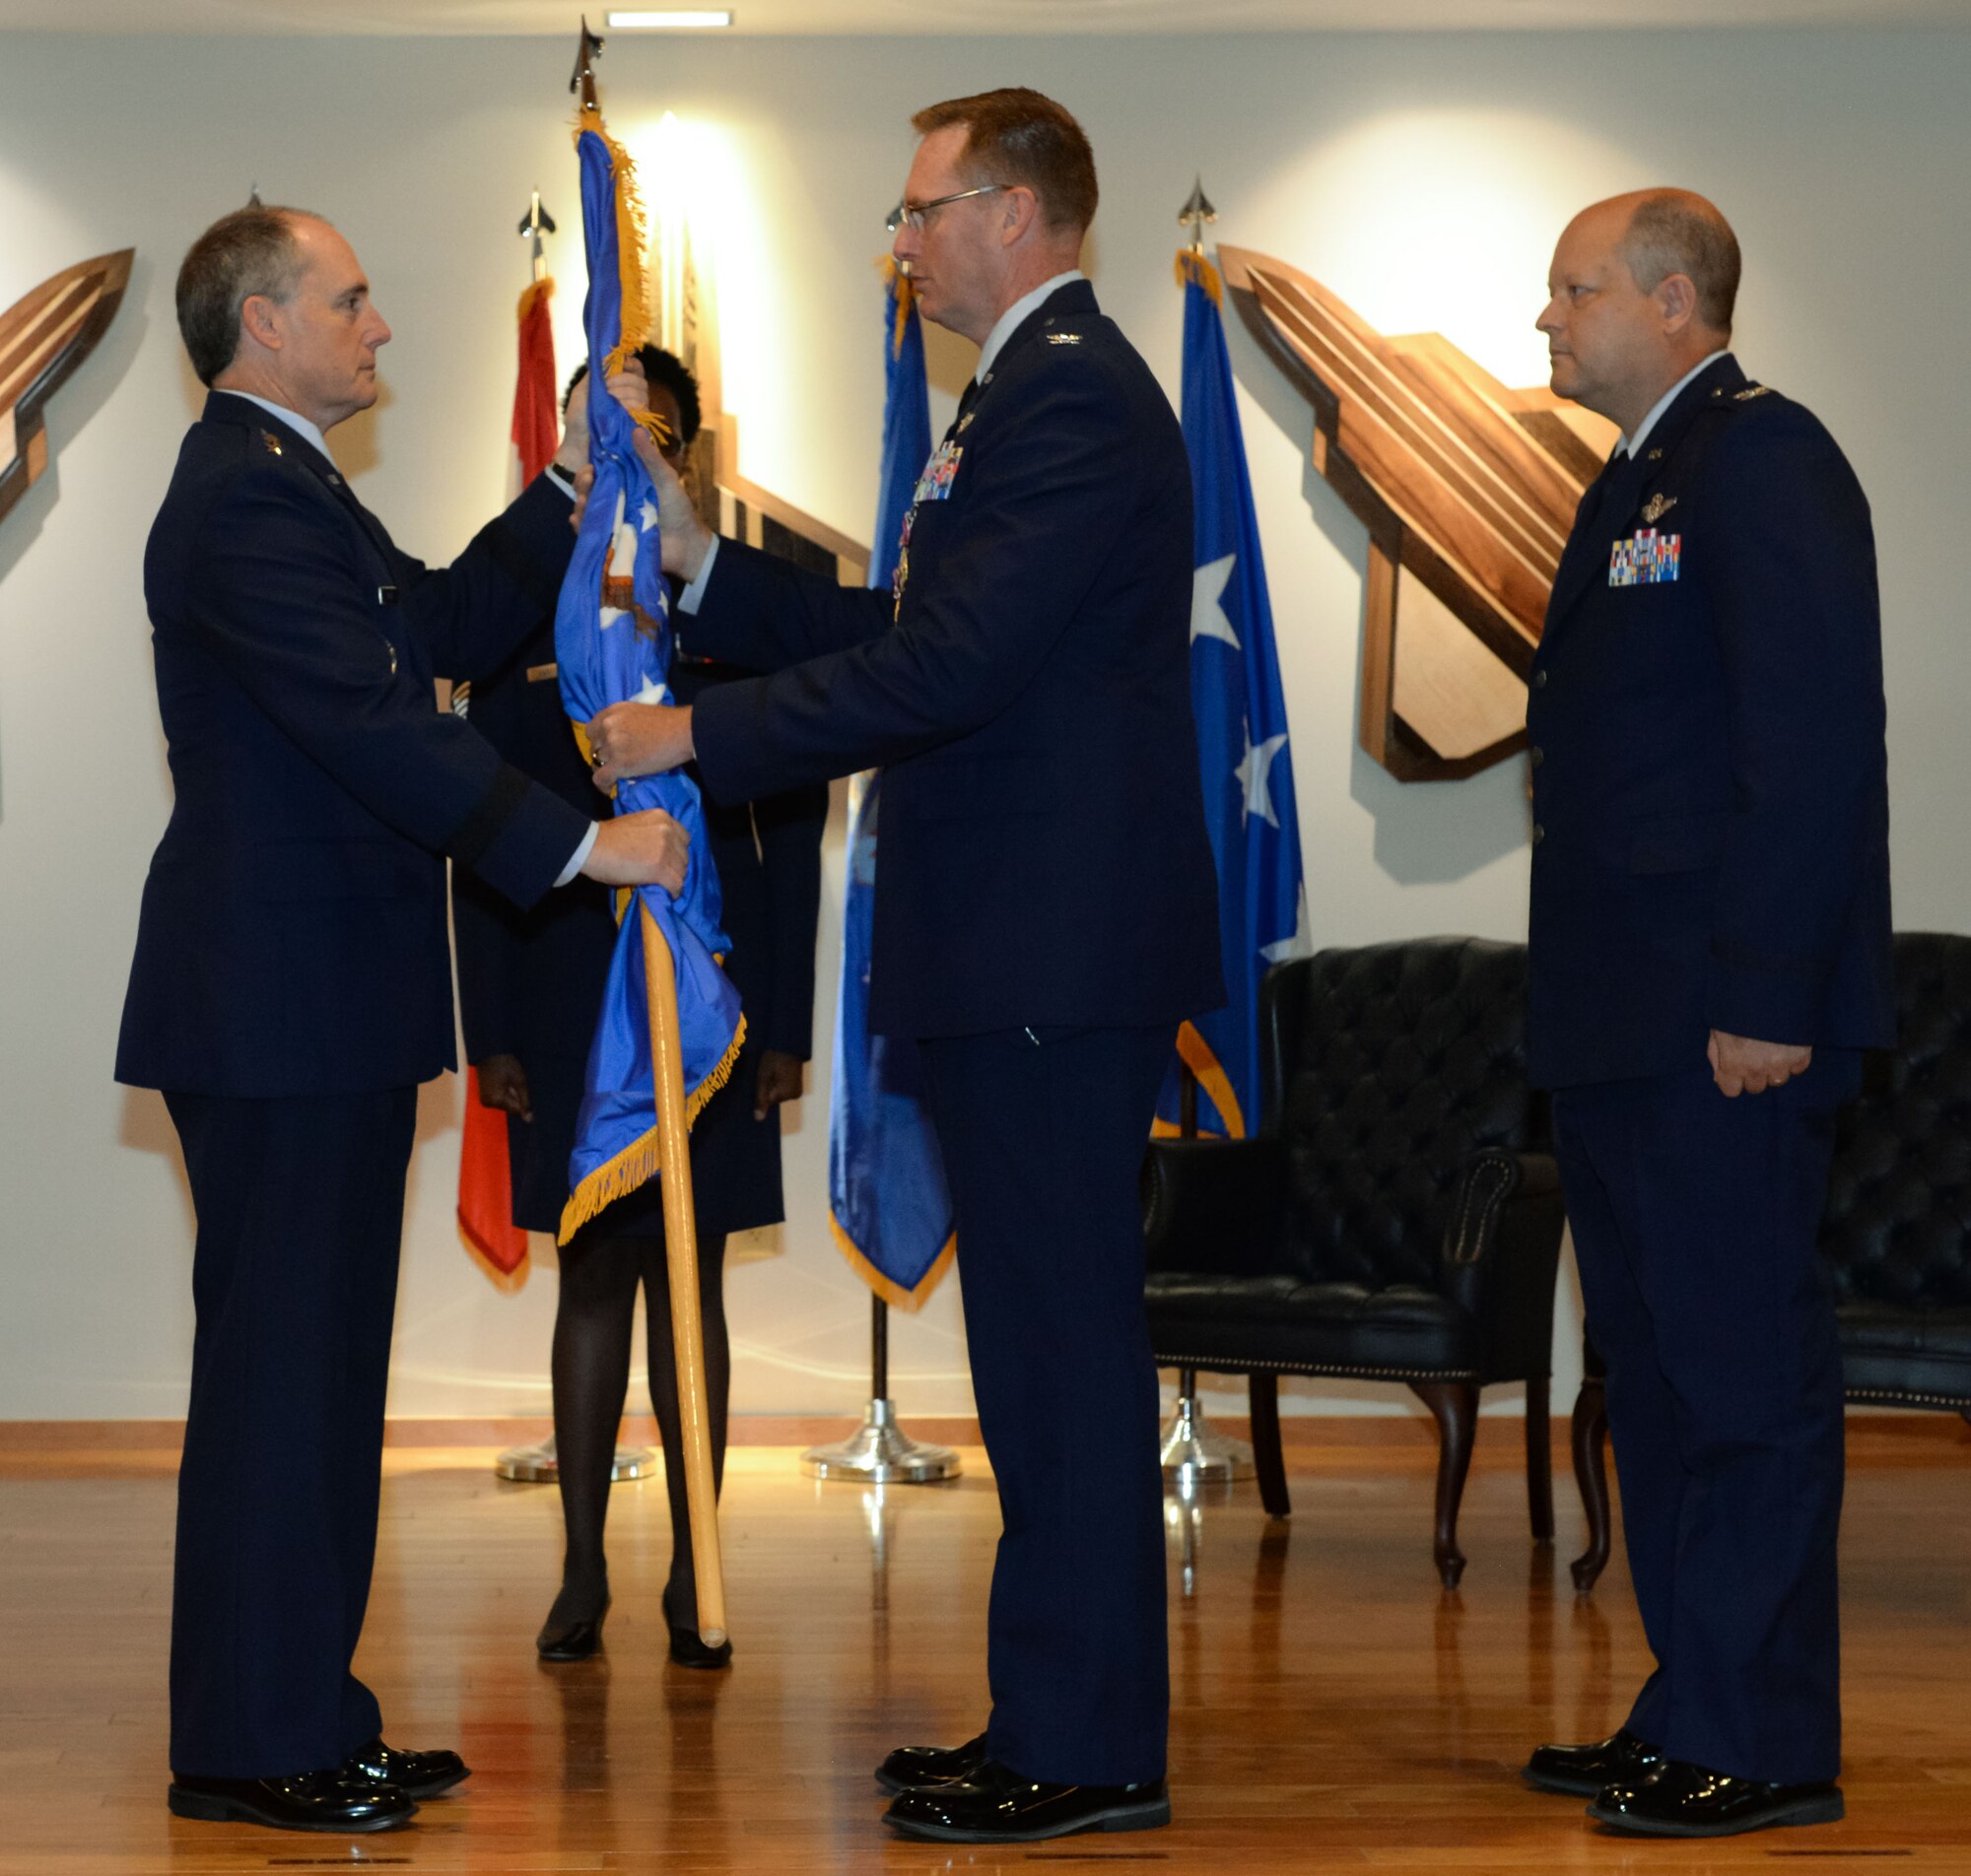 Col. Gregory Krane, former 601st Air Operations Center commander, passes the ceremonial flag to Lt. Gen. Kirk Pierce, Continental U.S. North American Aerospace Defense Command Region – 1st Air Force (Air Forces Northern and Air Forces Space) commander, during the 601st AOC change of command ceremony at Tyndall Air Force Base, Florida on June 1, 2022.  The passing of the flag symbolizes Krane's passing of command to Col. Clayton Schaefer, the new commander of the 601st AOC. (Air National Guard photo by Master Sgt. Regina Young)